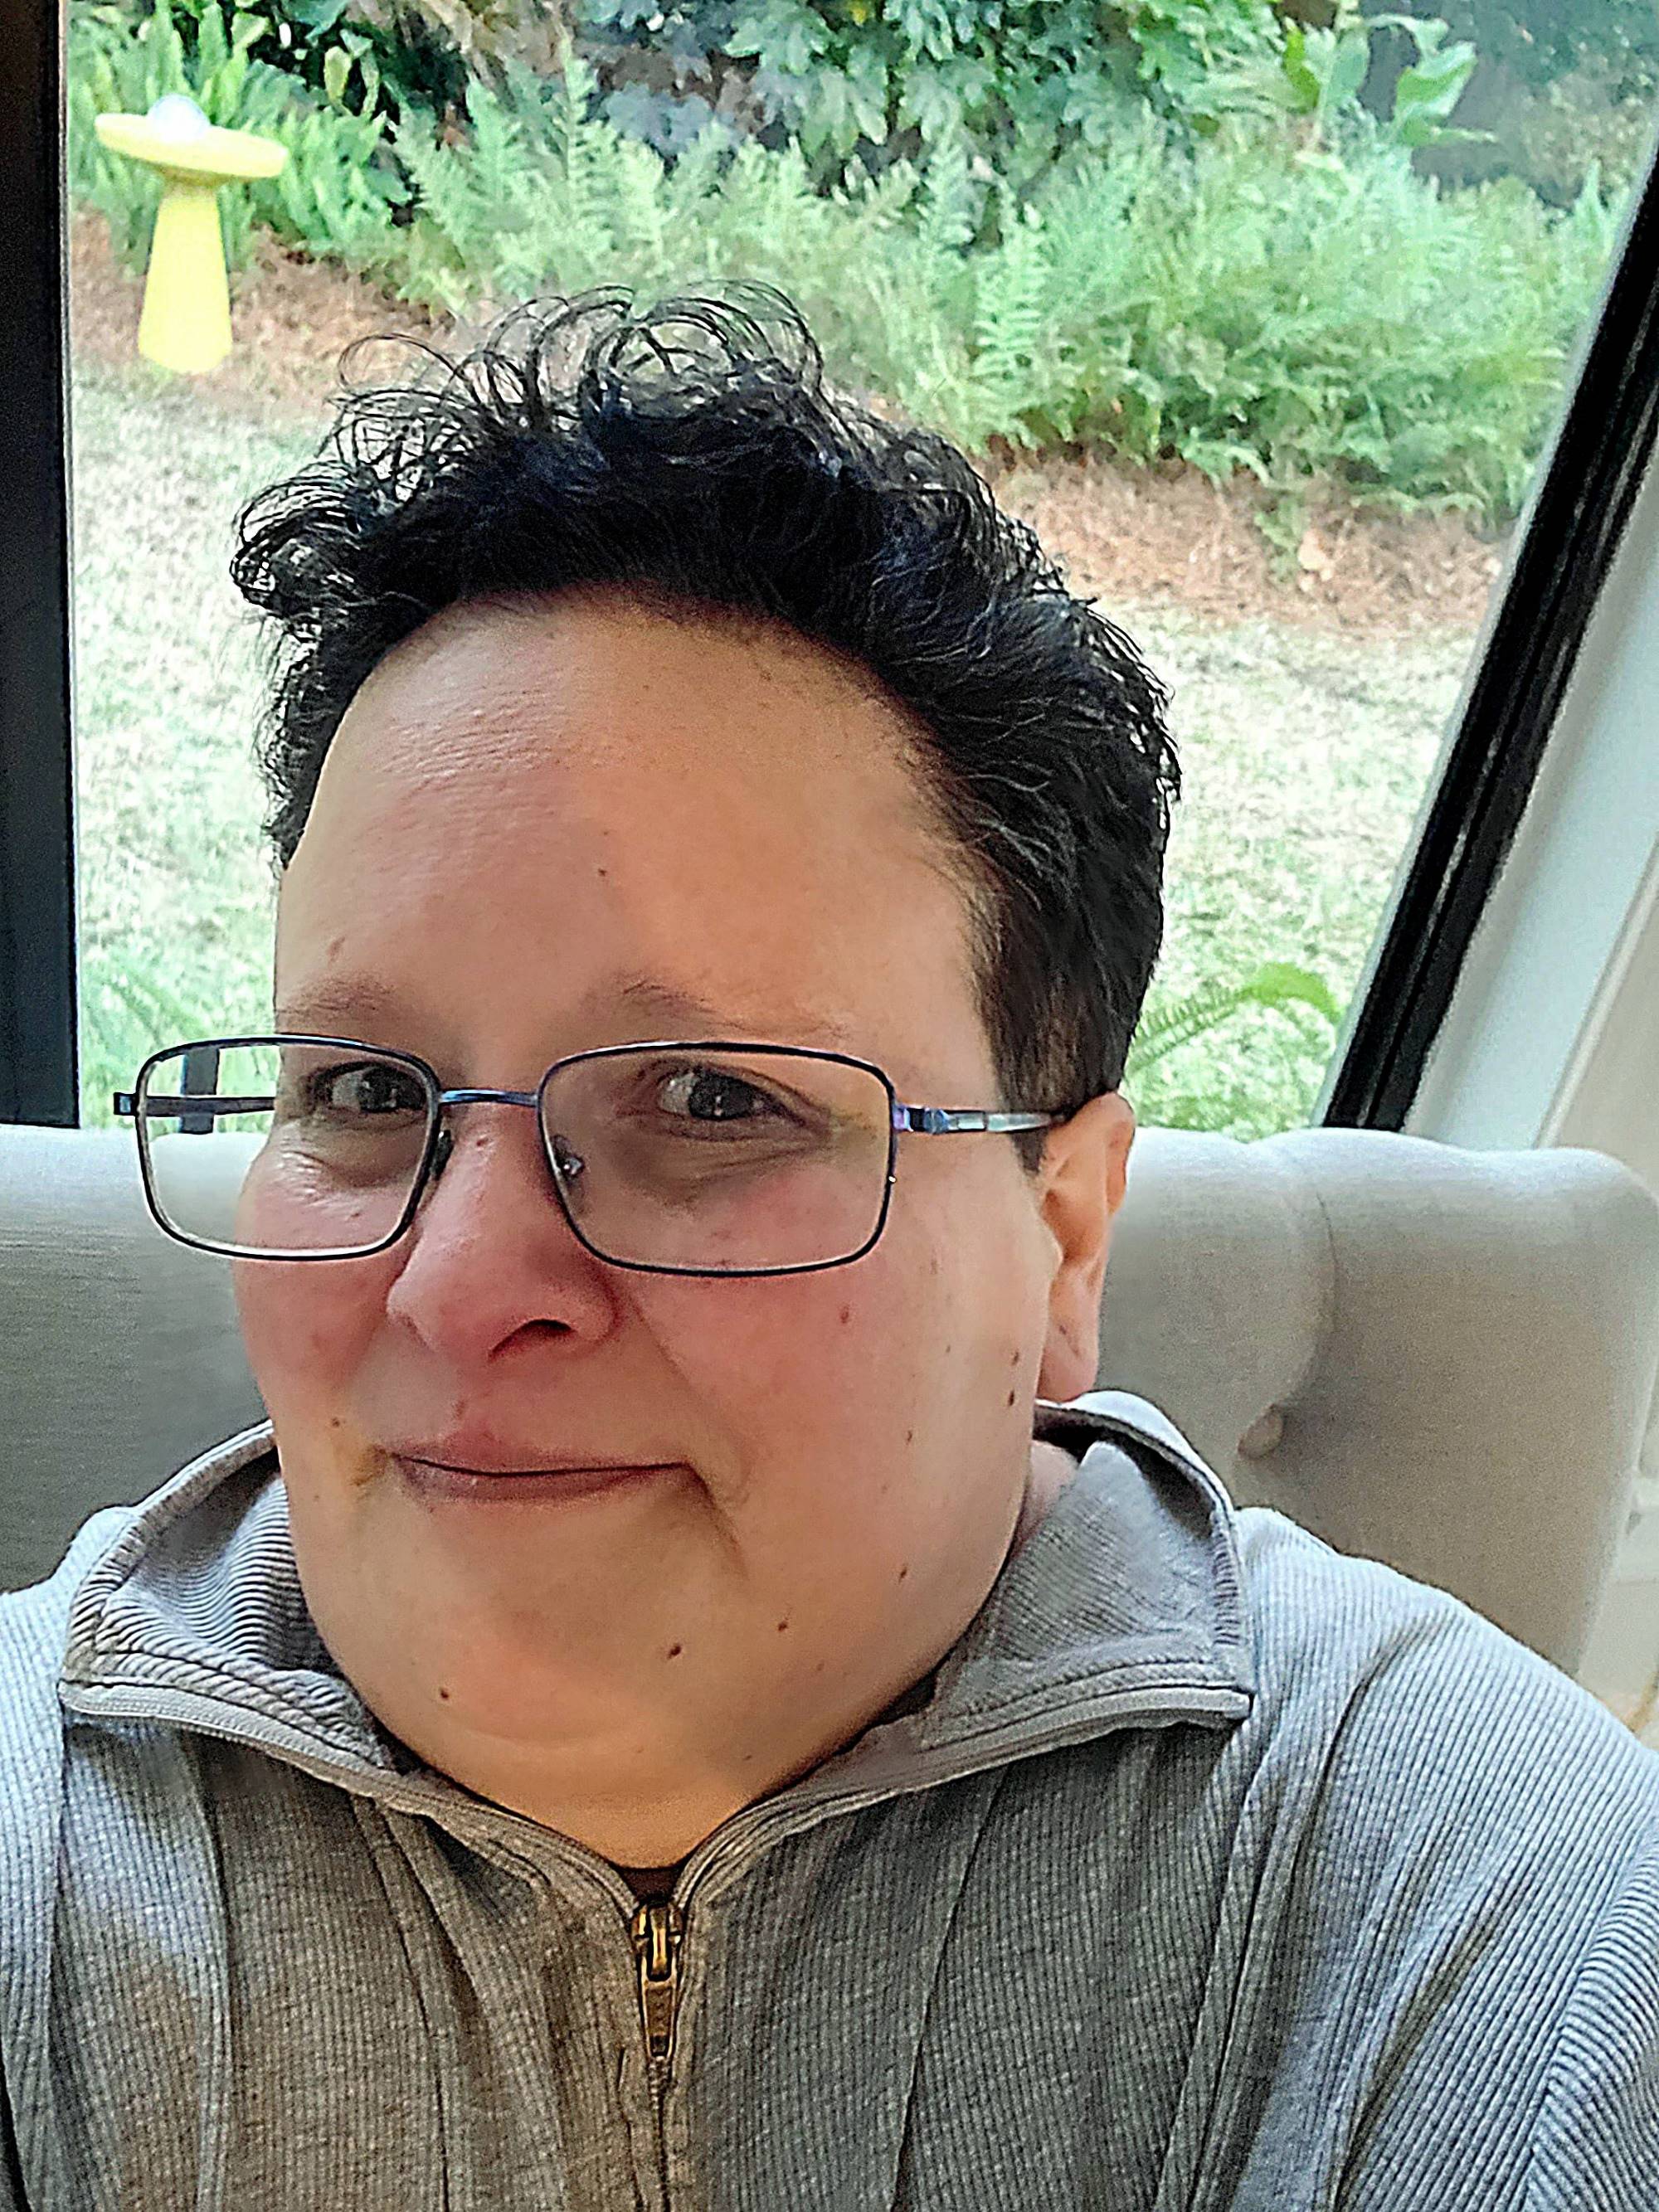 A non-binary person with short dark hair and blue metallic framed glasses looks at the camera nervously.